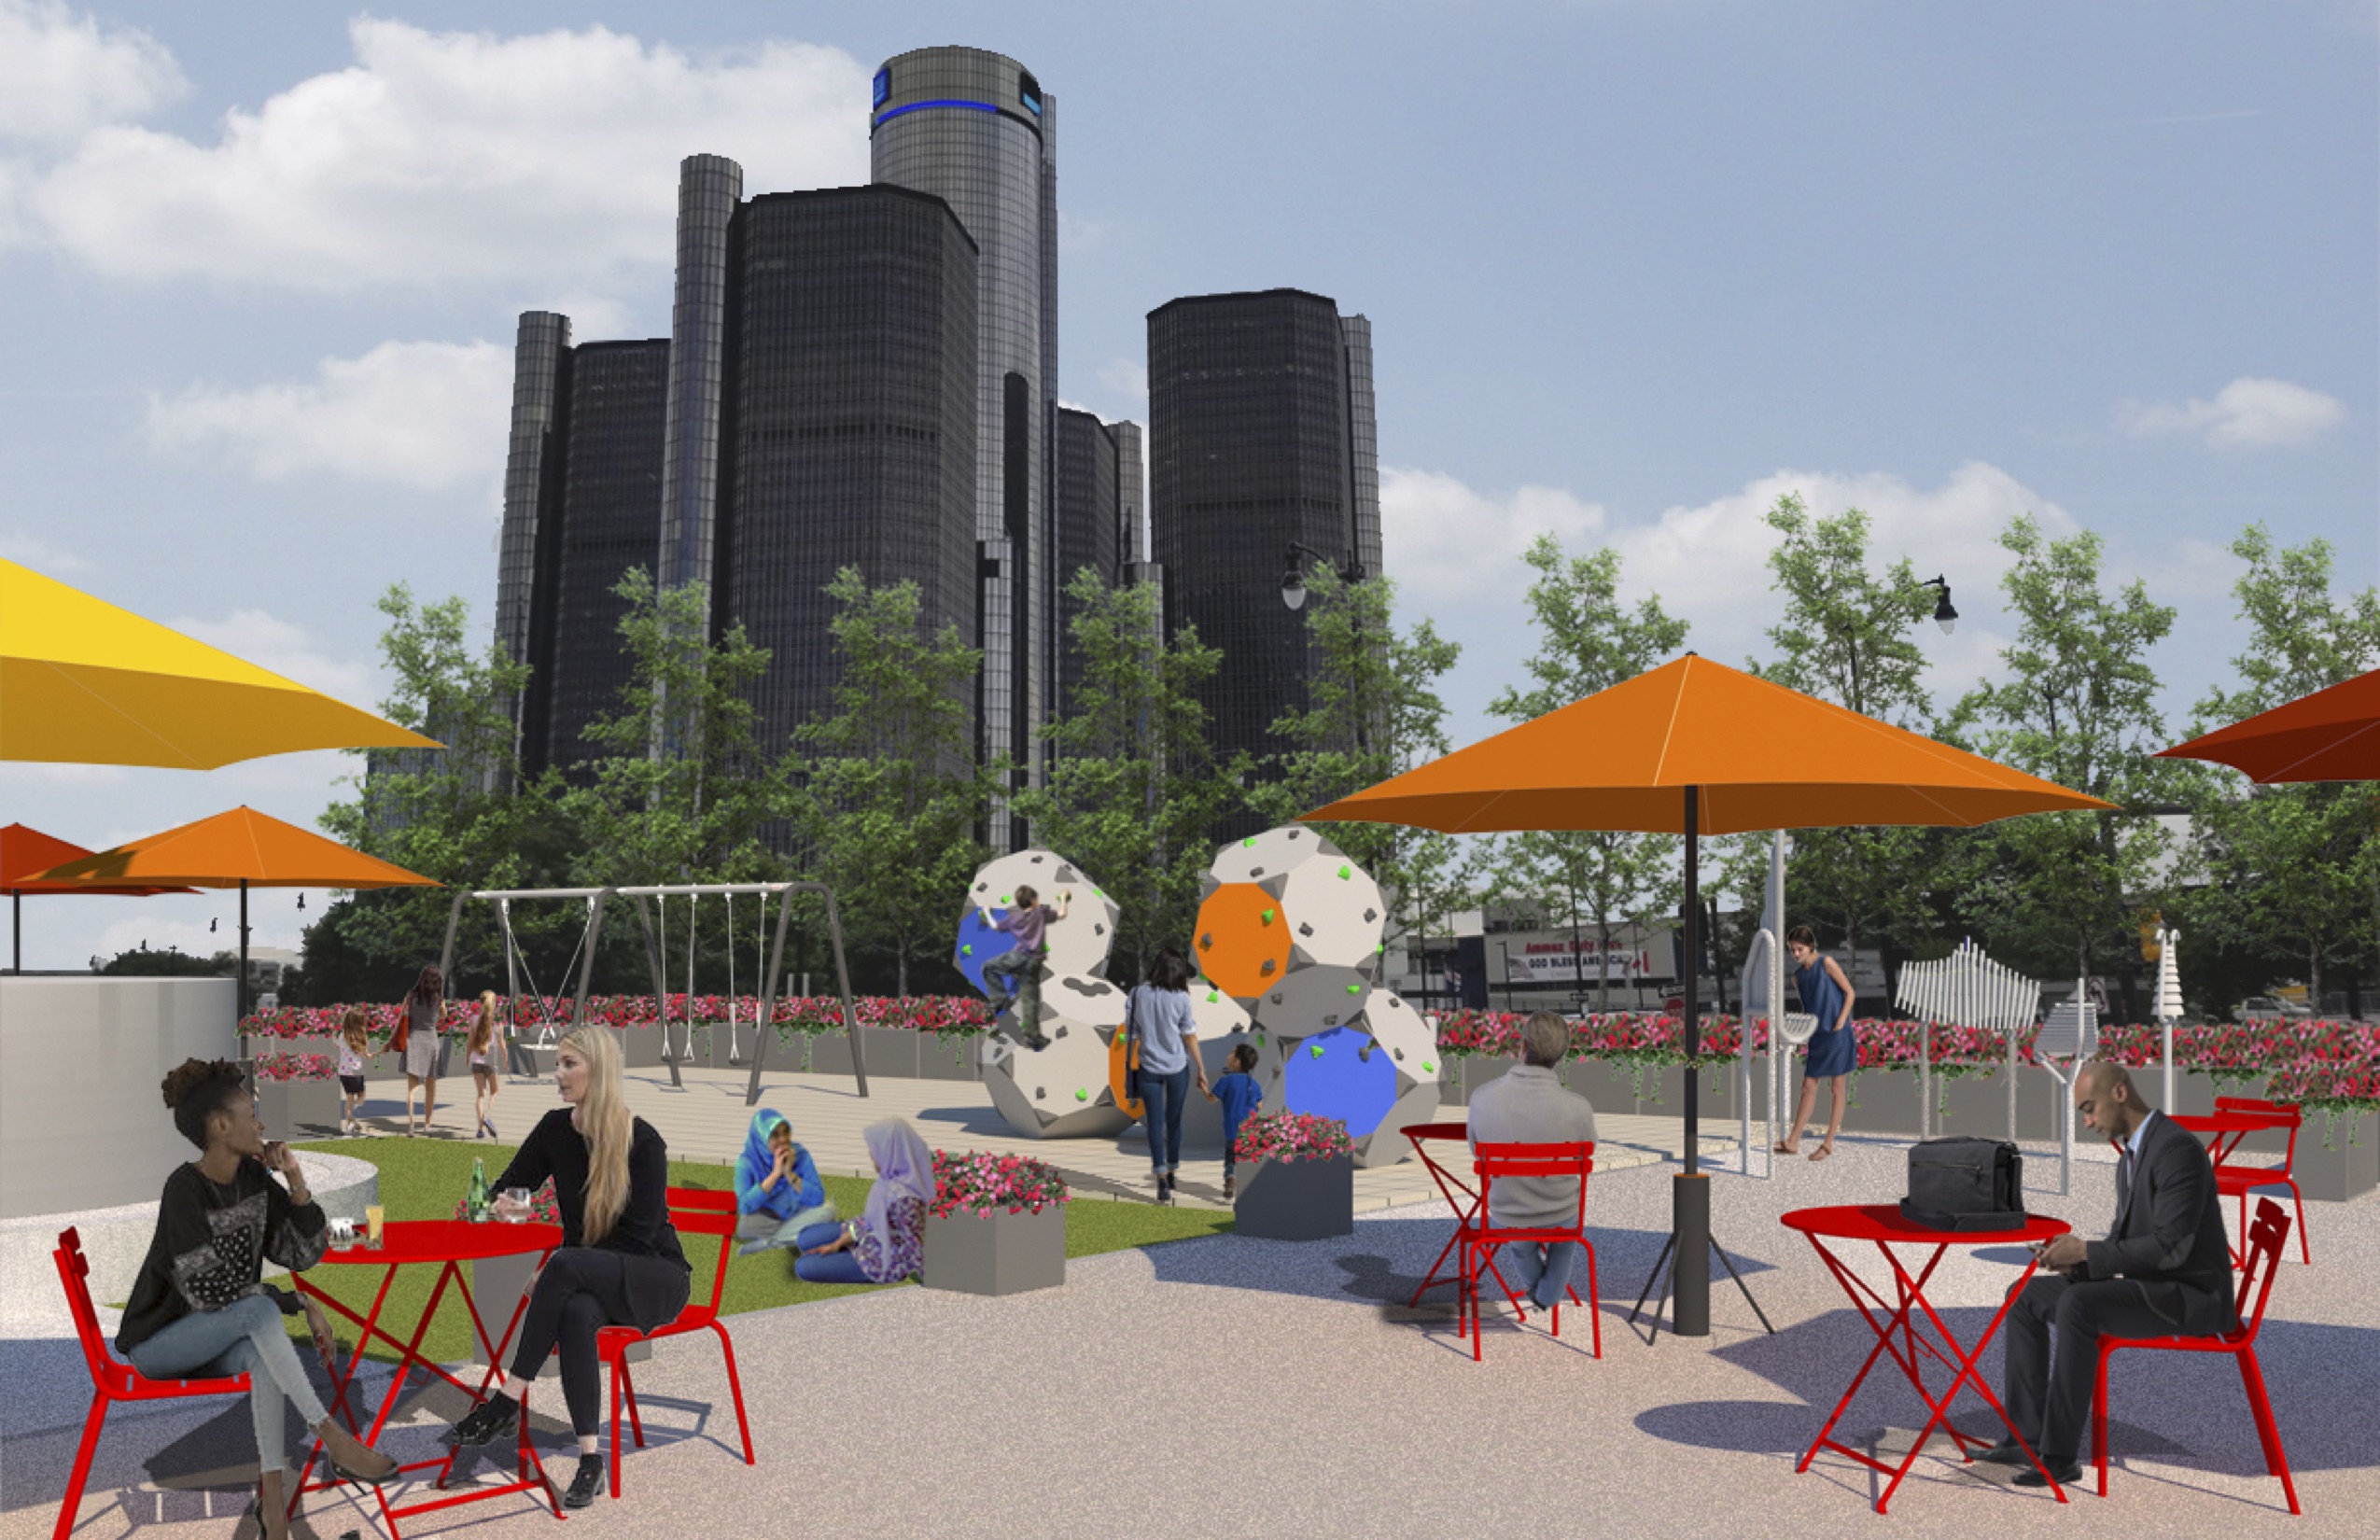 Rendering of people sitting at several red tables under awnings with play ground equipment and a big glass skyscraper in the background.